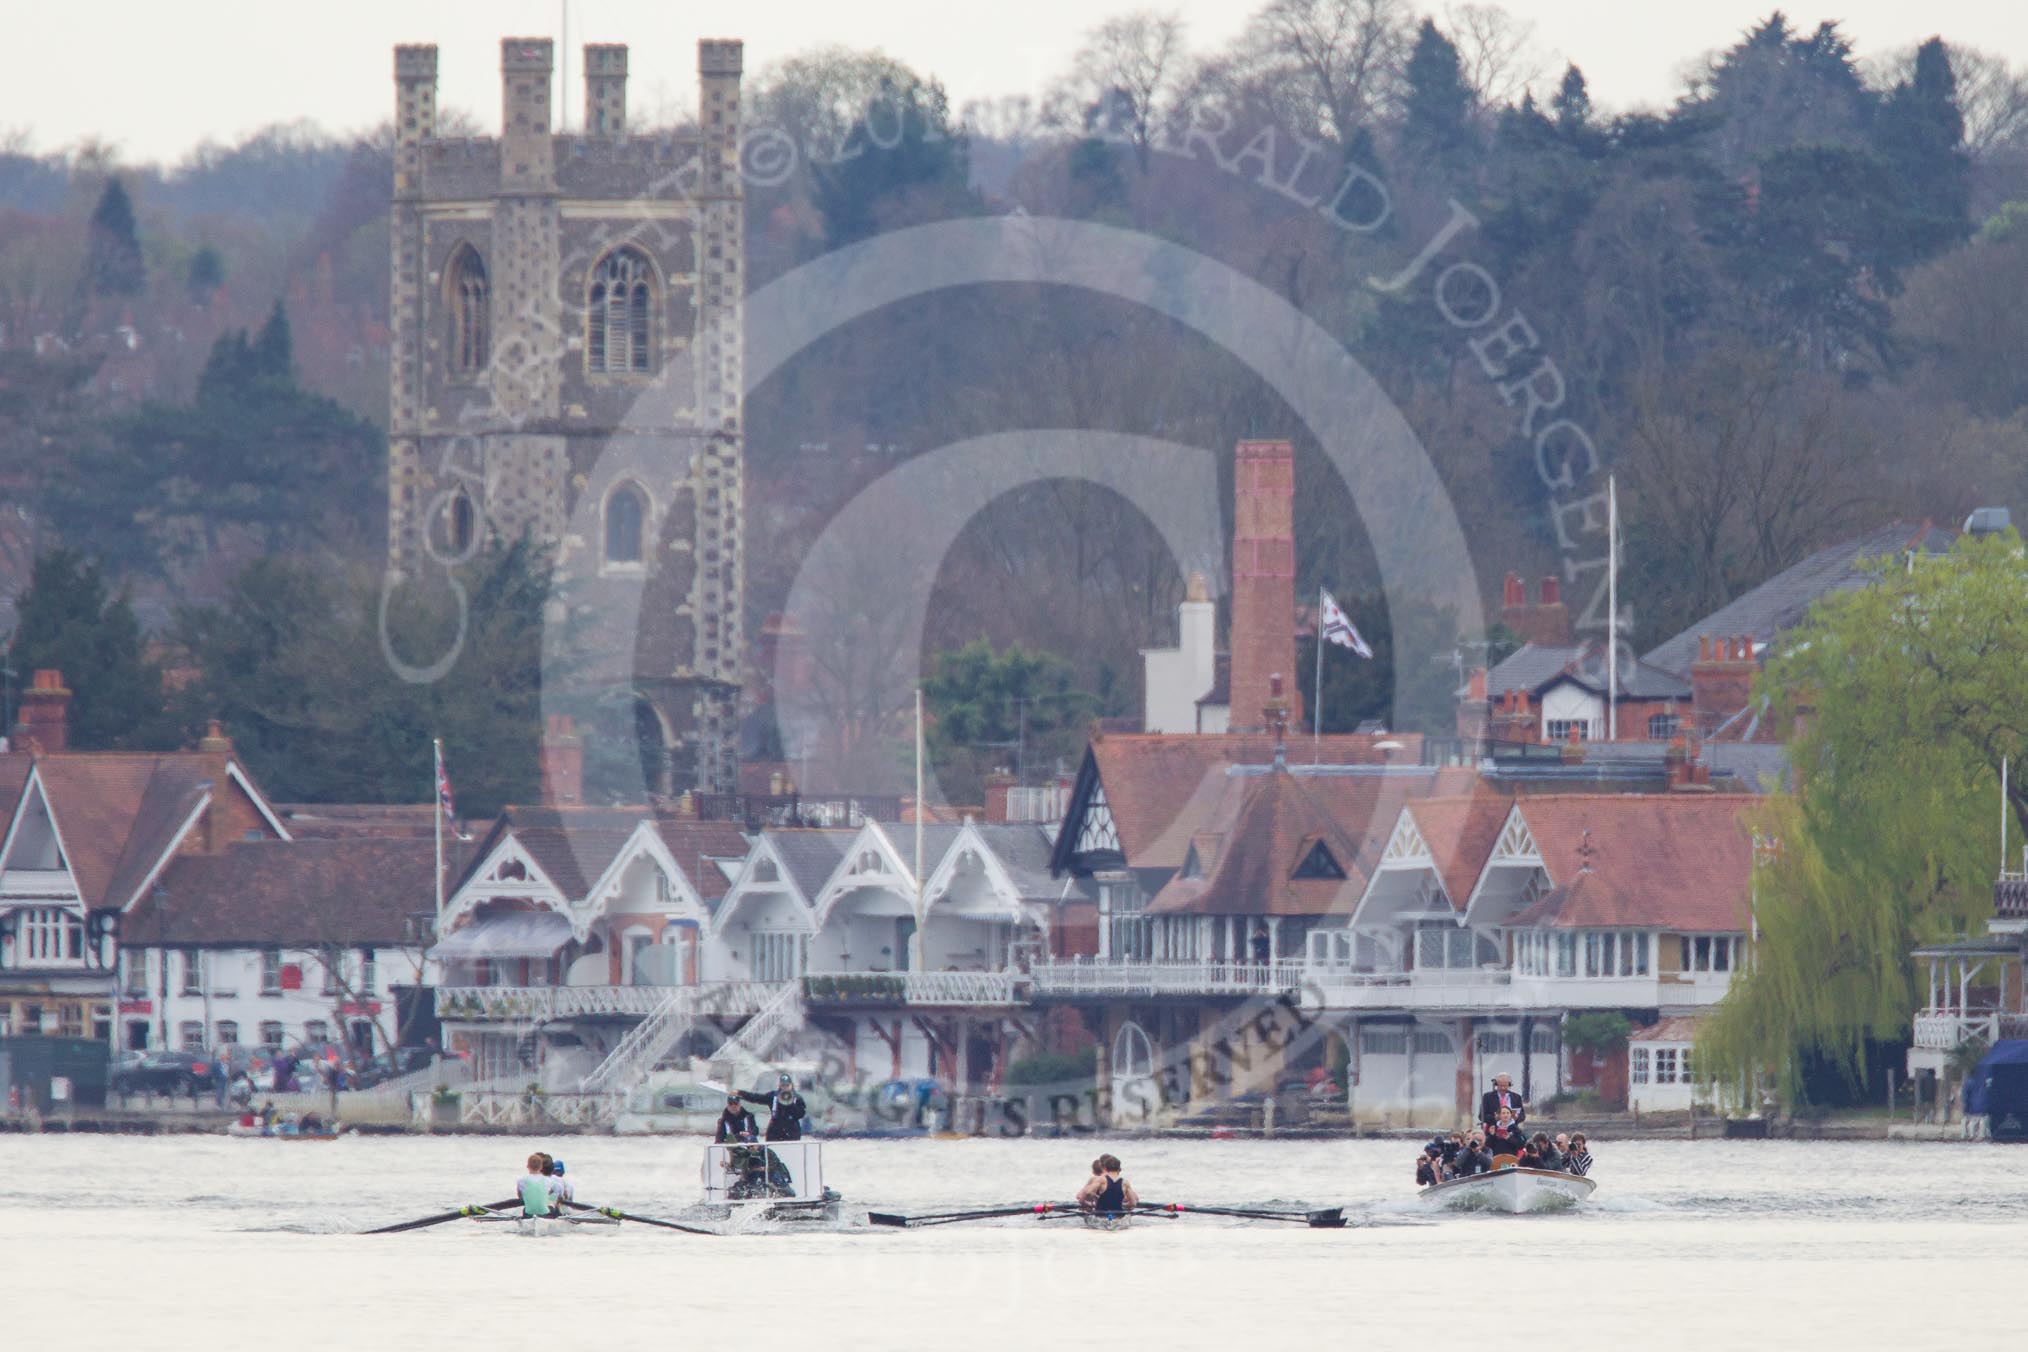 The Women's Boat Race and Henley Boat Races 2014: The start of the Lightweight Men's Boat Race - OULRC vs CULRC, Oxford is on the right (Bucks) side..
River Thames,
Henley-on-Thames,
Buckinghamshire,
United Kingdom,
on 30 March 2014 at 15:38, image #355